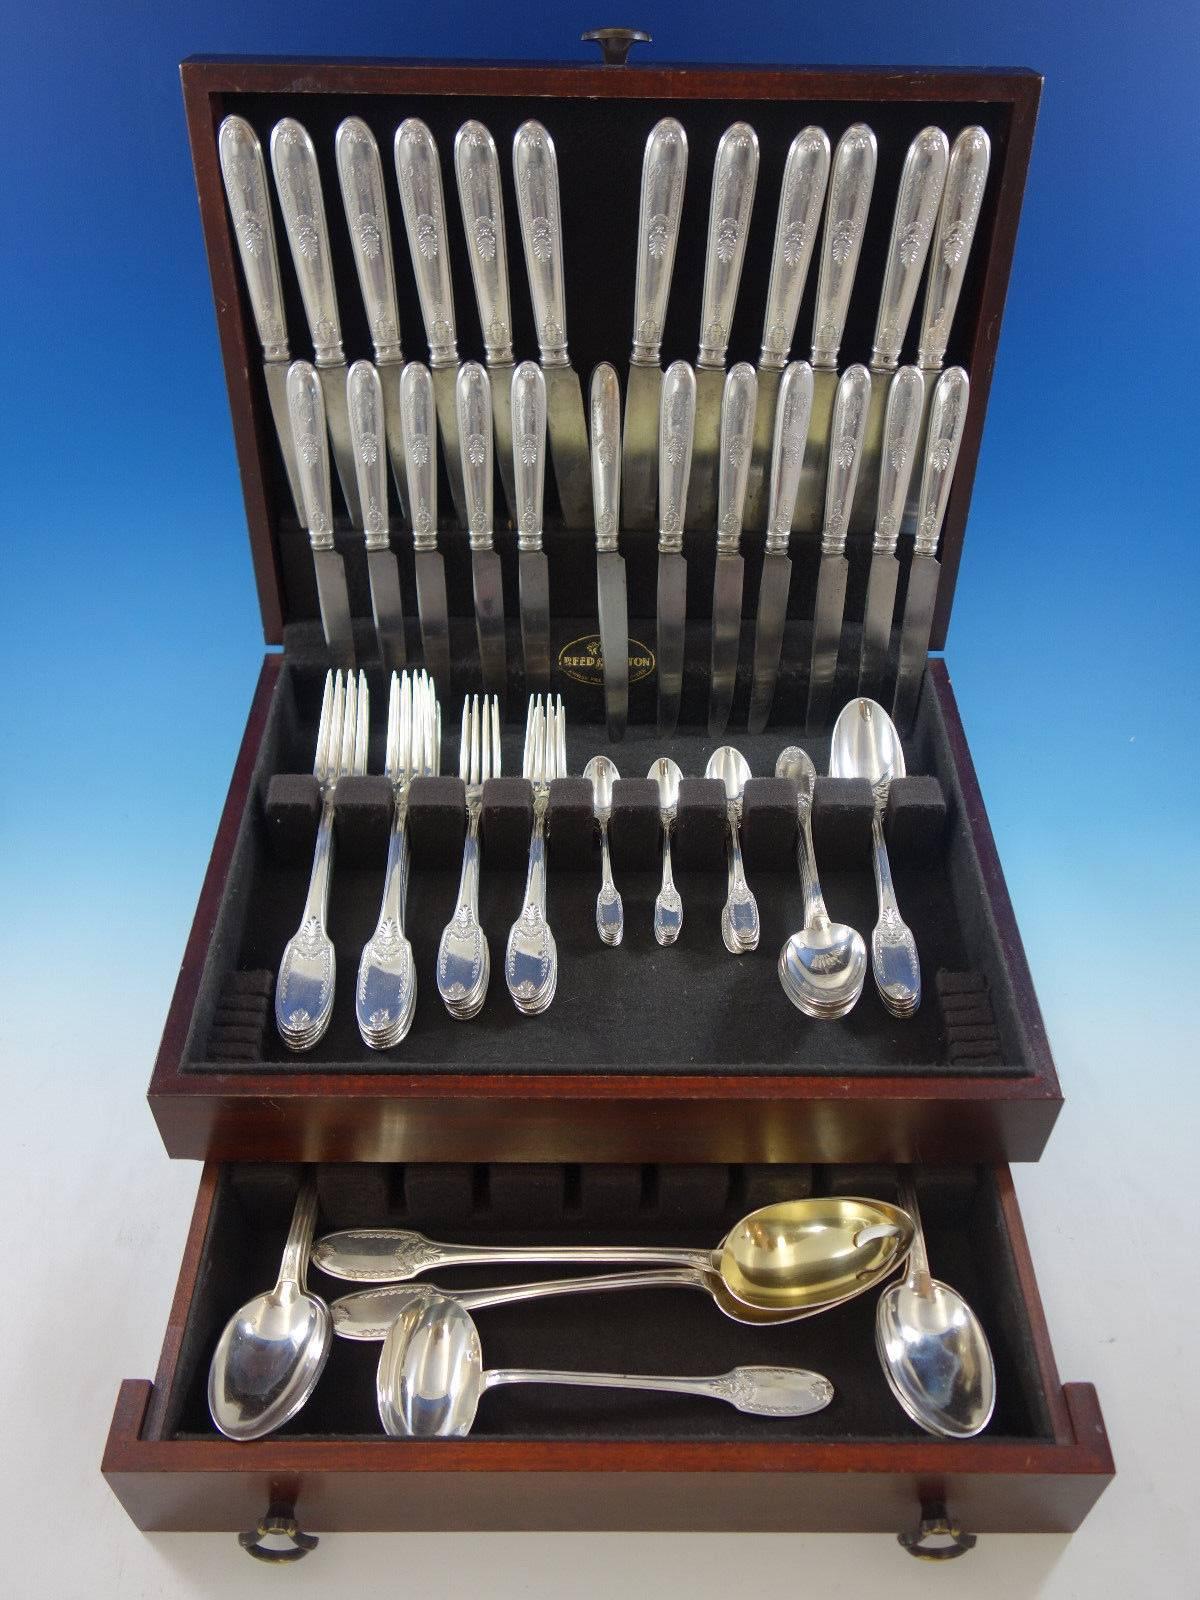 Empire by Olier & Caron, French sterling silver flatware set, 93 pieces. This set includes: 

12 dinner size knives, 10 1/4